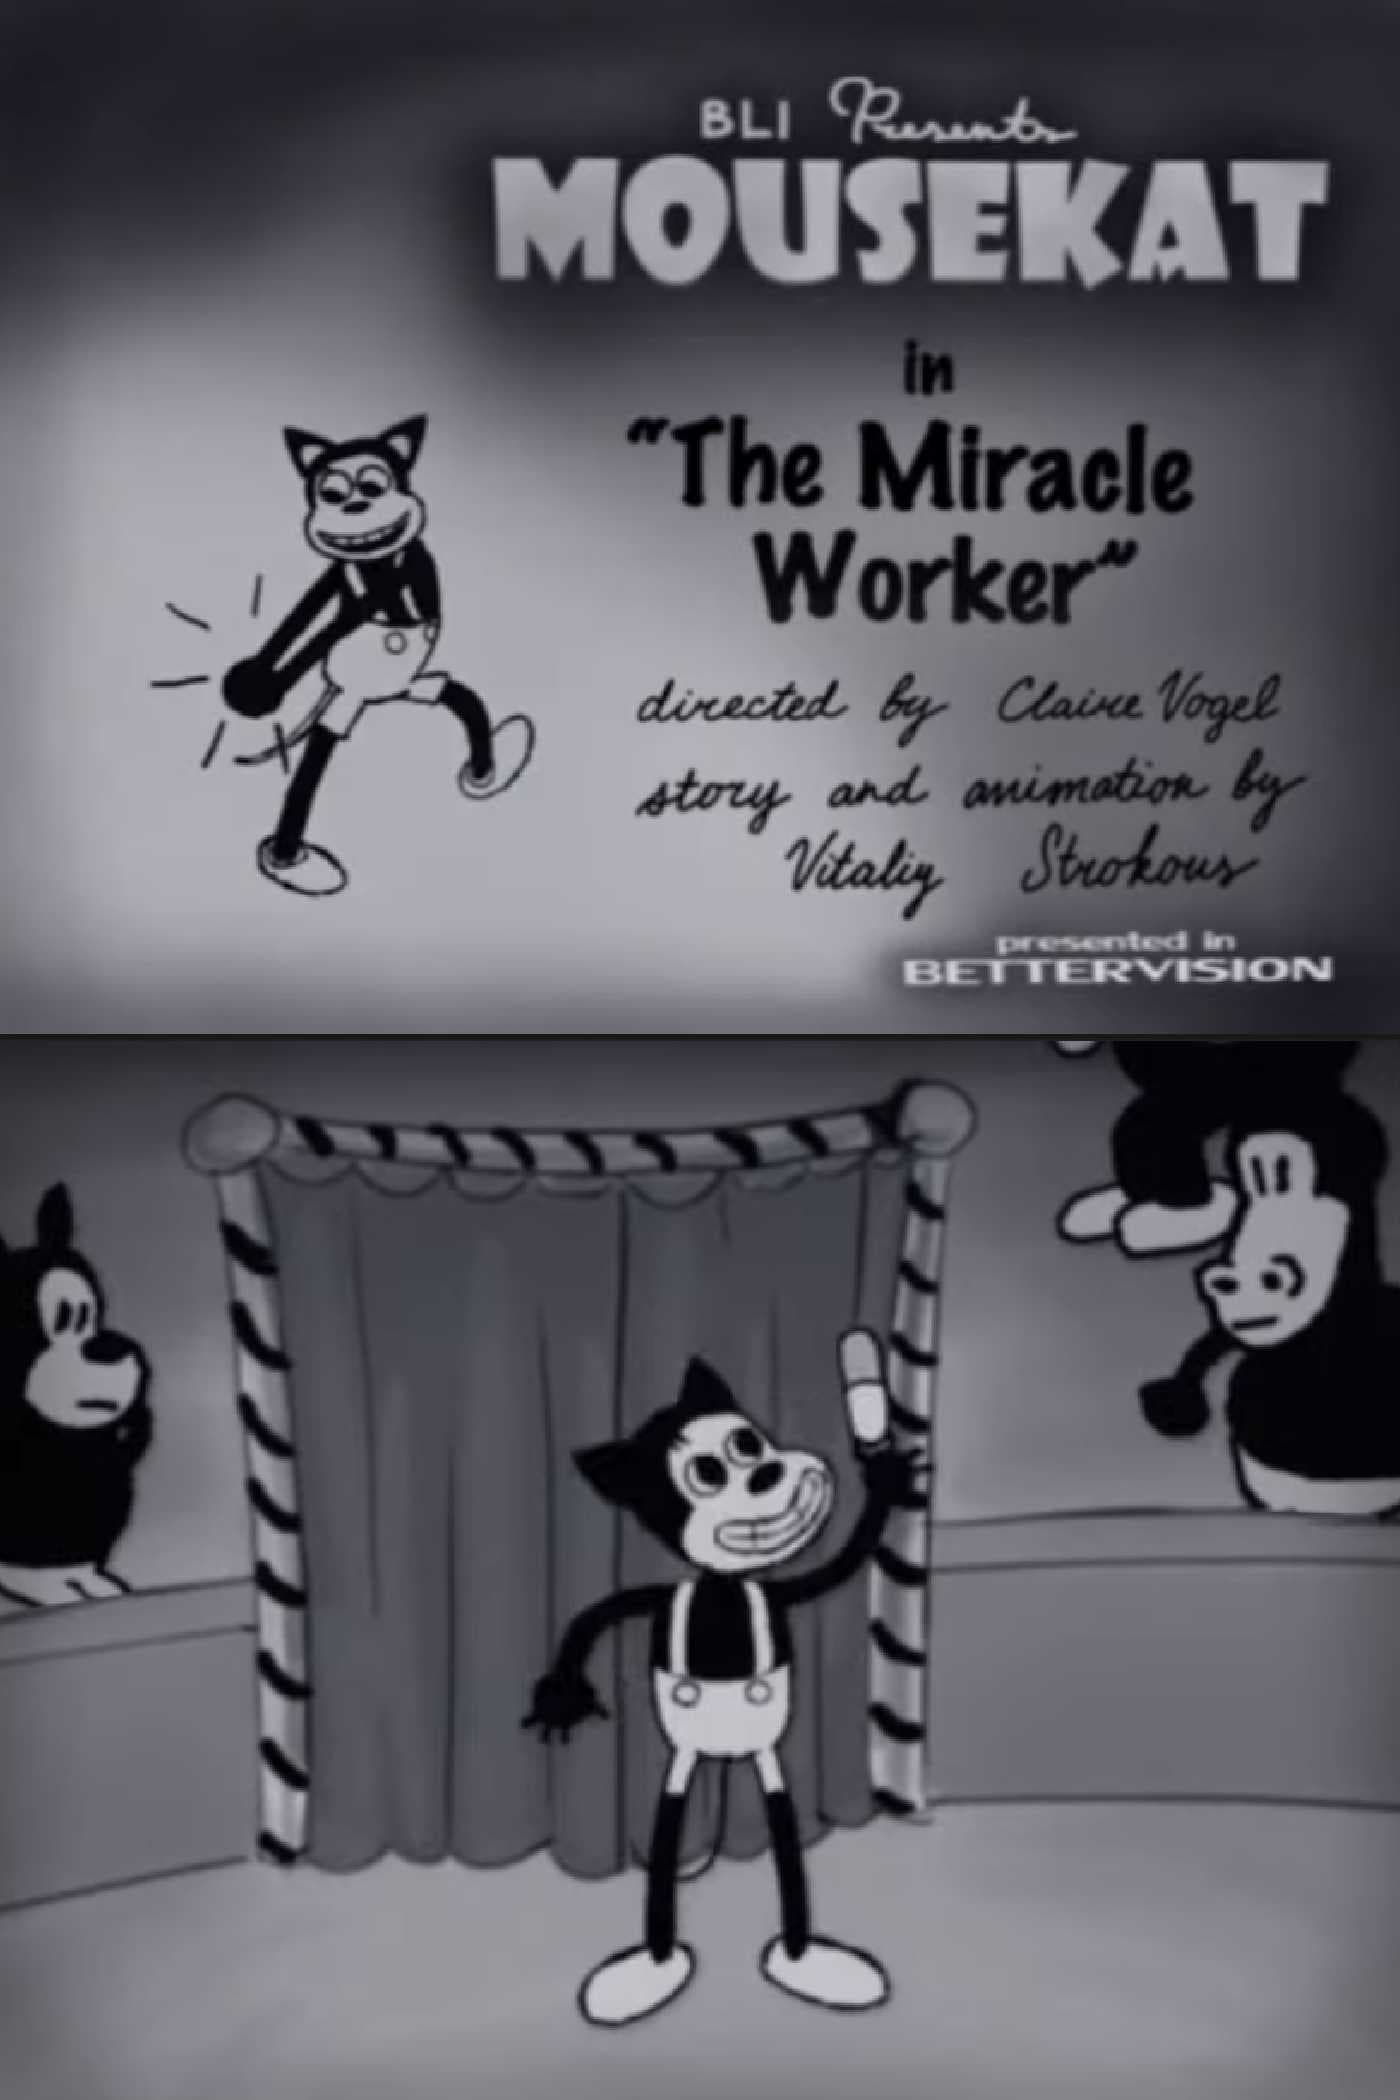 BLI Presents - MOUSEKAT in "The Miracle Worker"